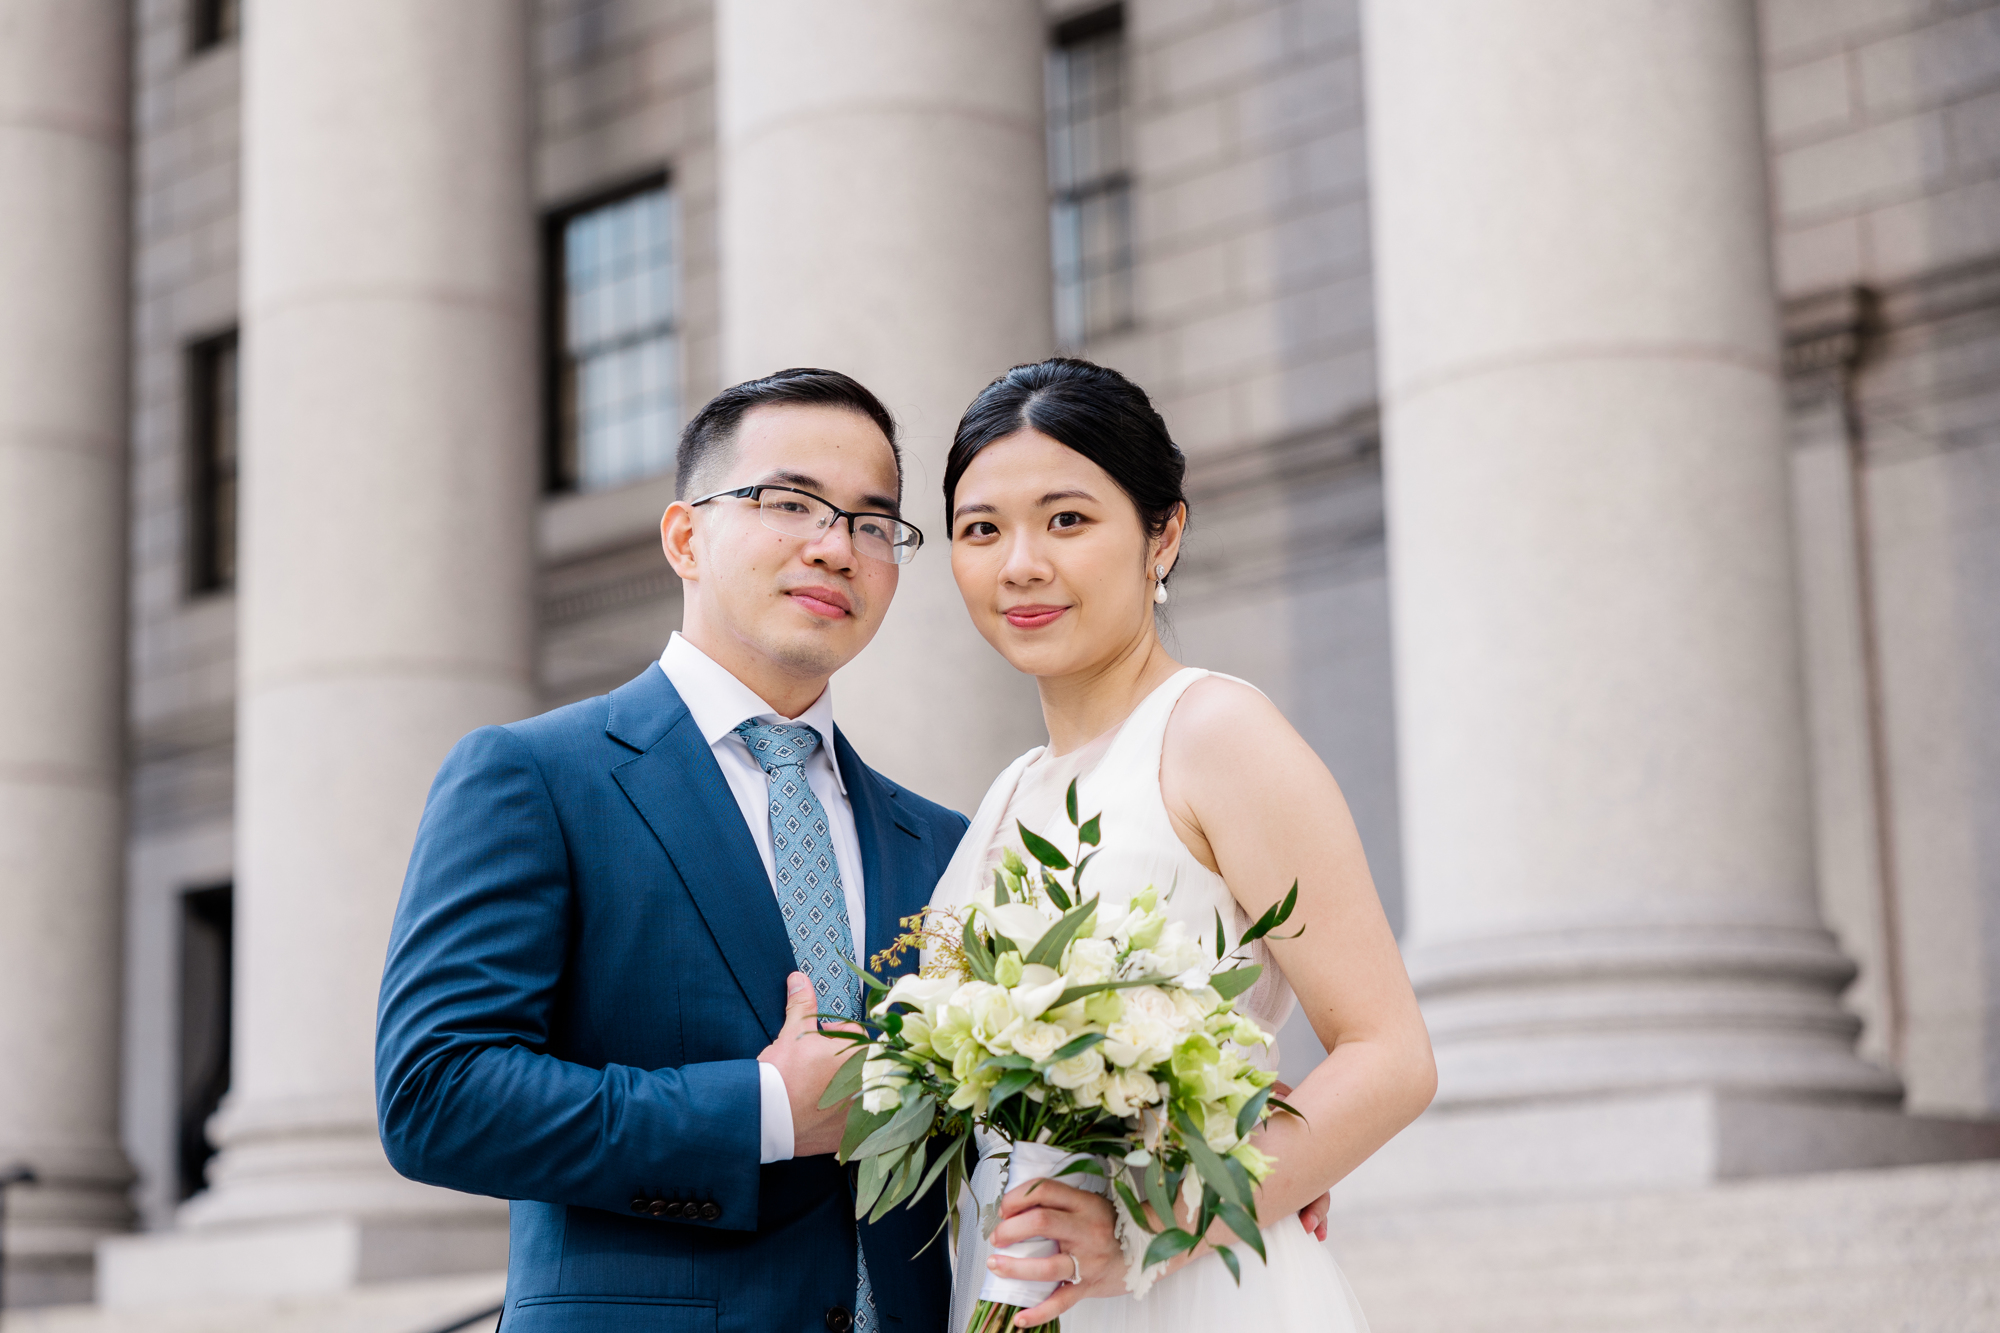 Joyful Elopement Photos in DUMBO and Central Park New York